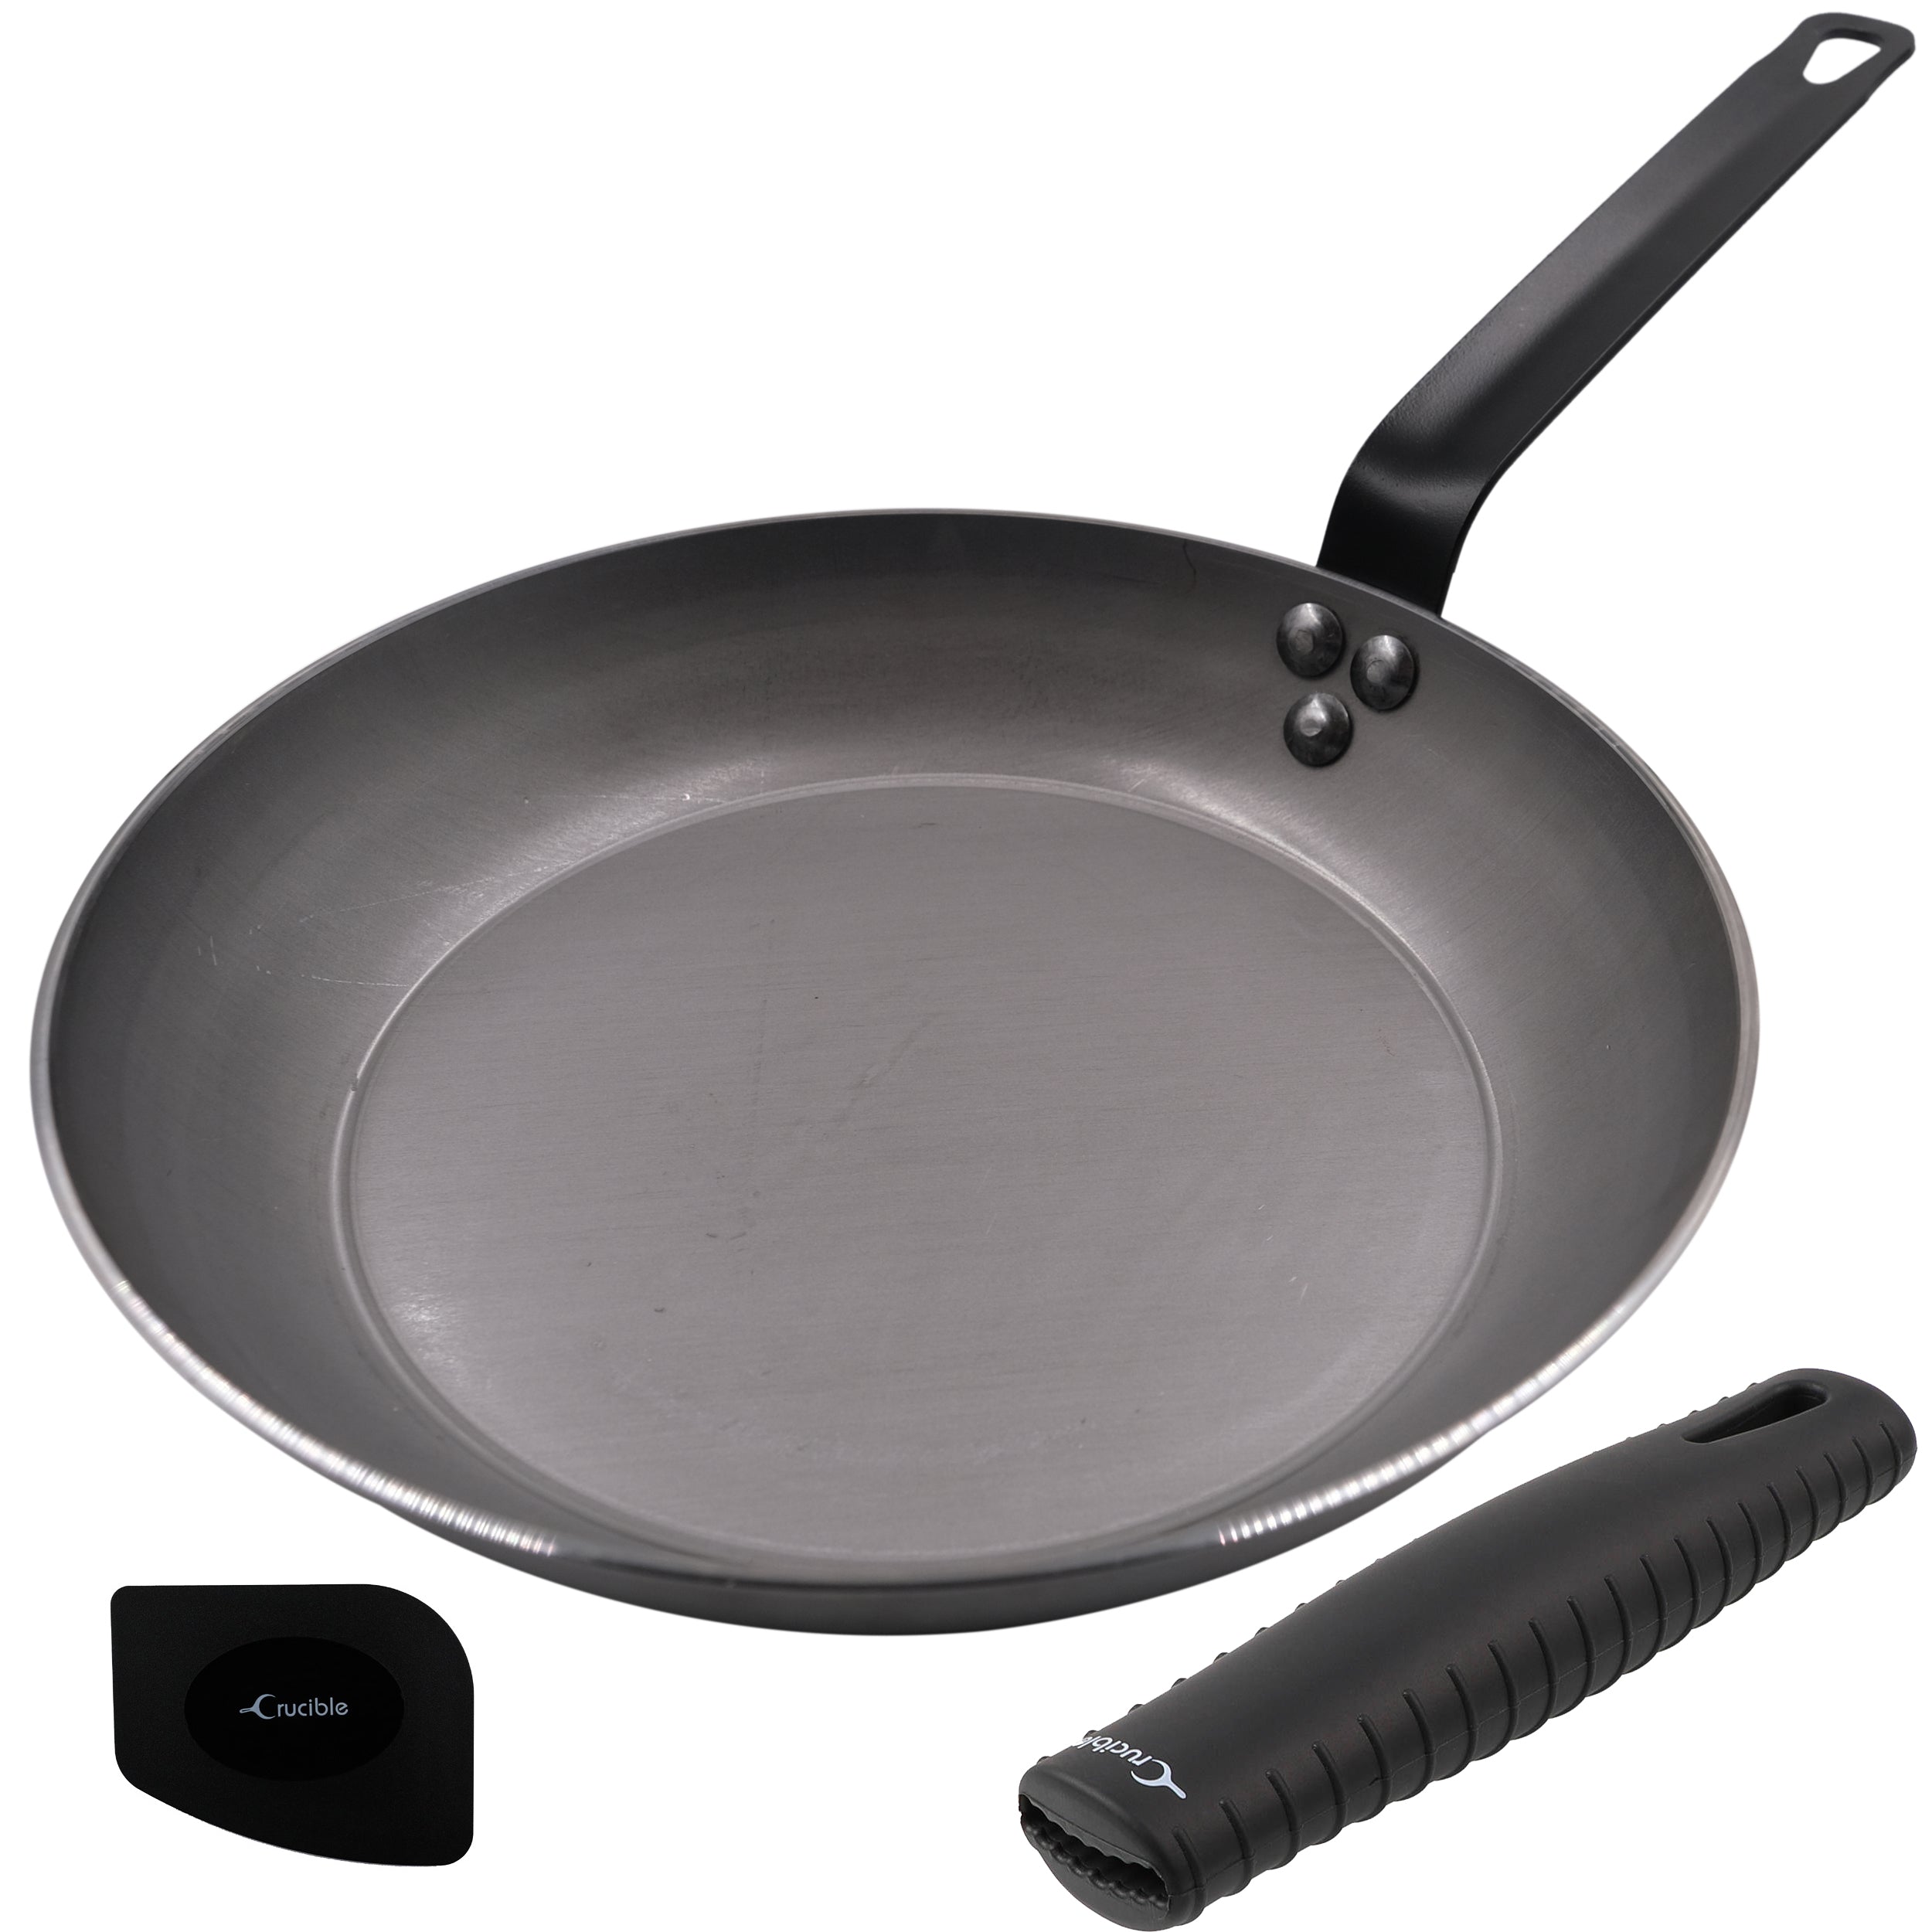 Carbon Steel Fry Pan - Non-Stick - Round - Black - 12 - 1 Count Box